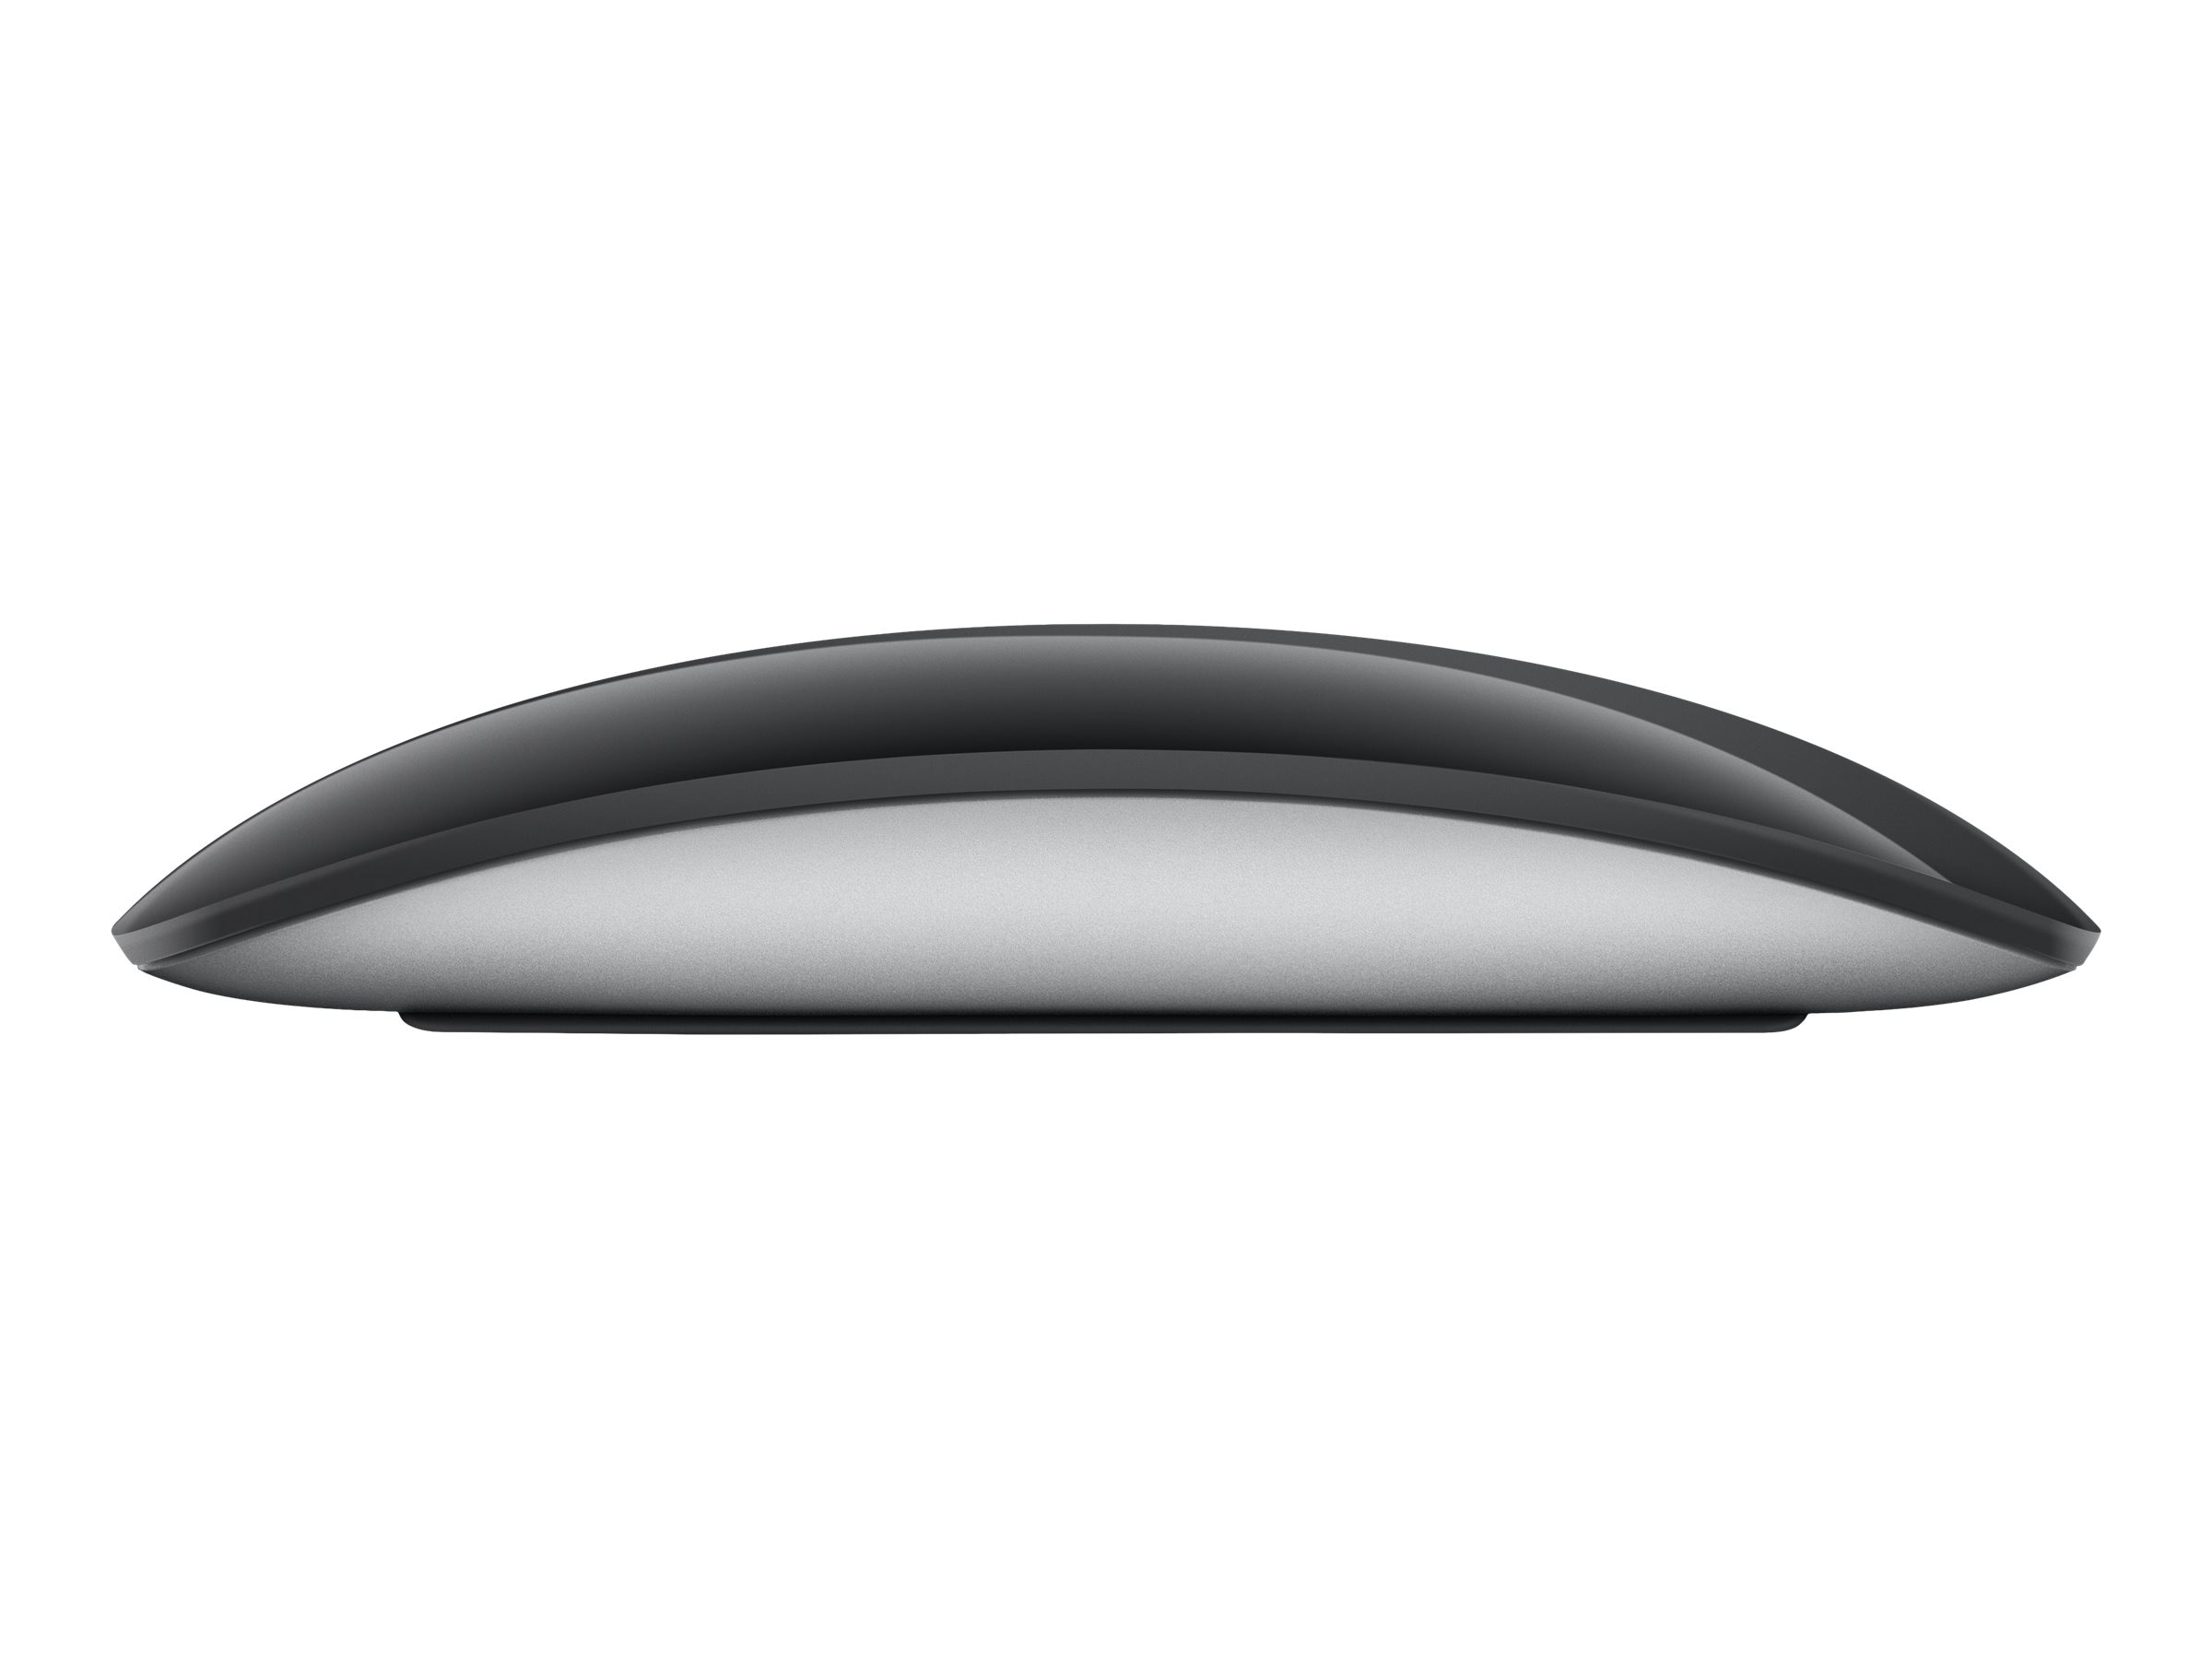 MMMQ3AM/A - Apple Magic Mouse Black Multi-Touch Surface